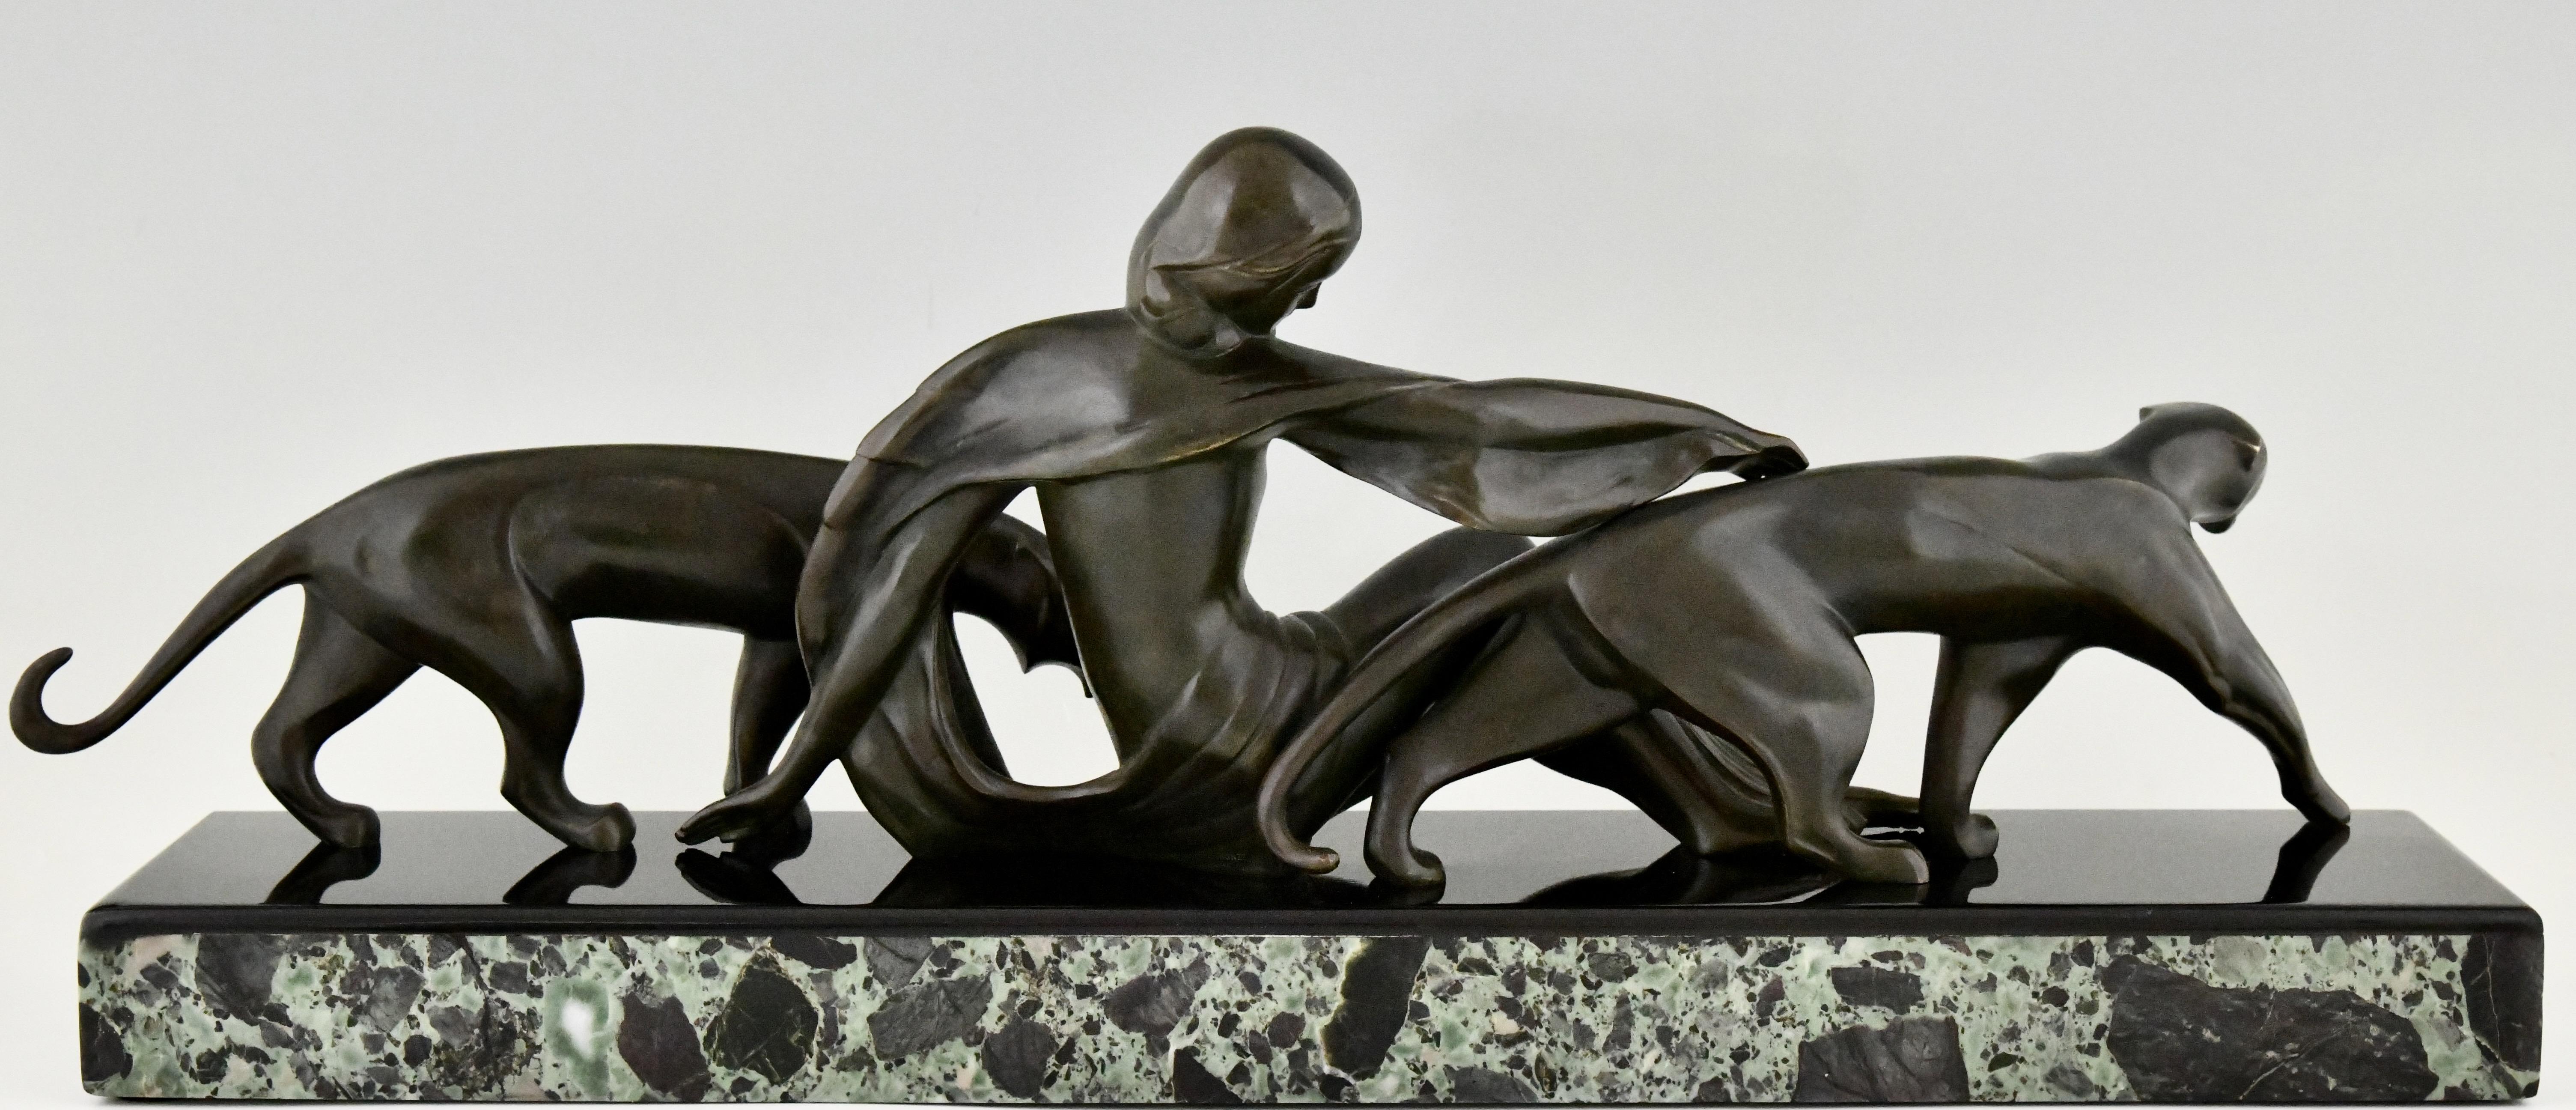 Early 20th Century Art Deco bronze sculpture woman with panthers signed by Michel Decoux 1920